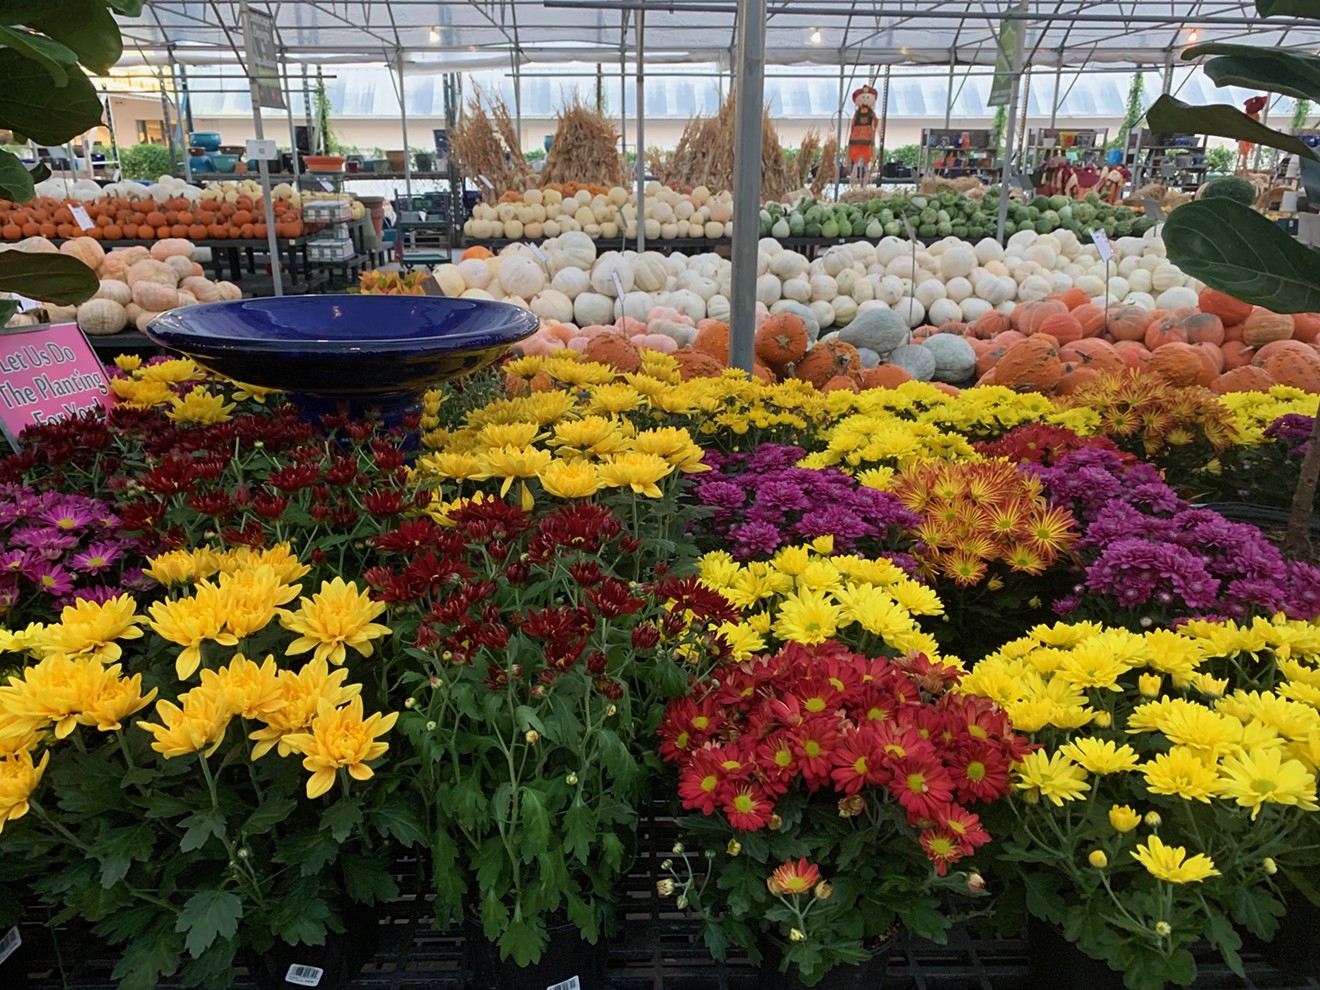 Cornelius Nursery is overflowing with fall mums and Texas-grown pumpkins.